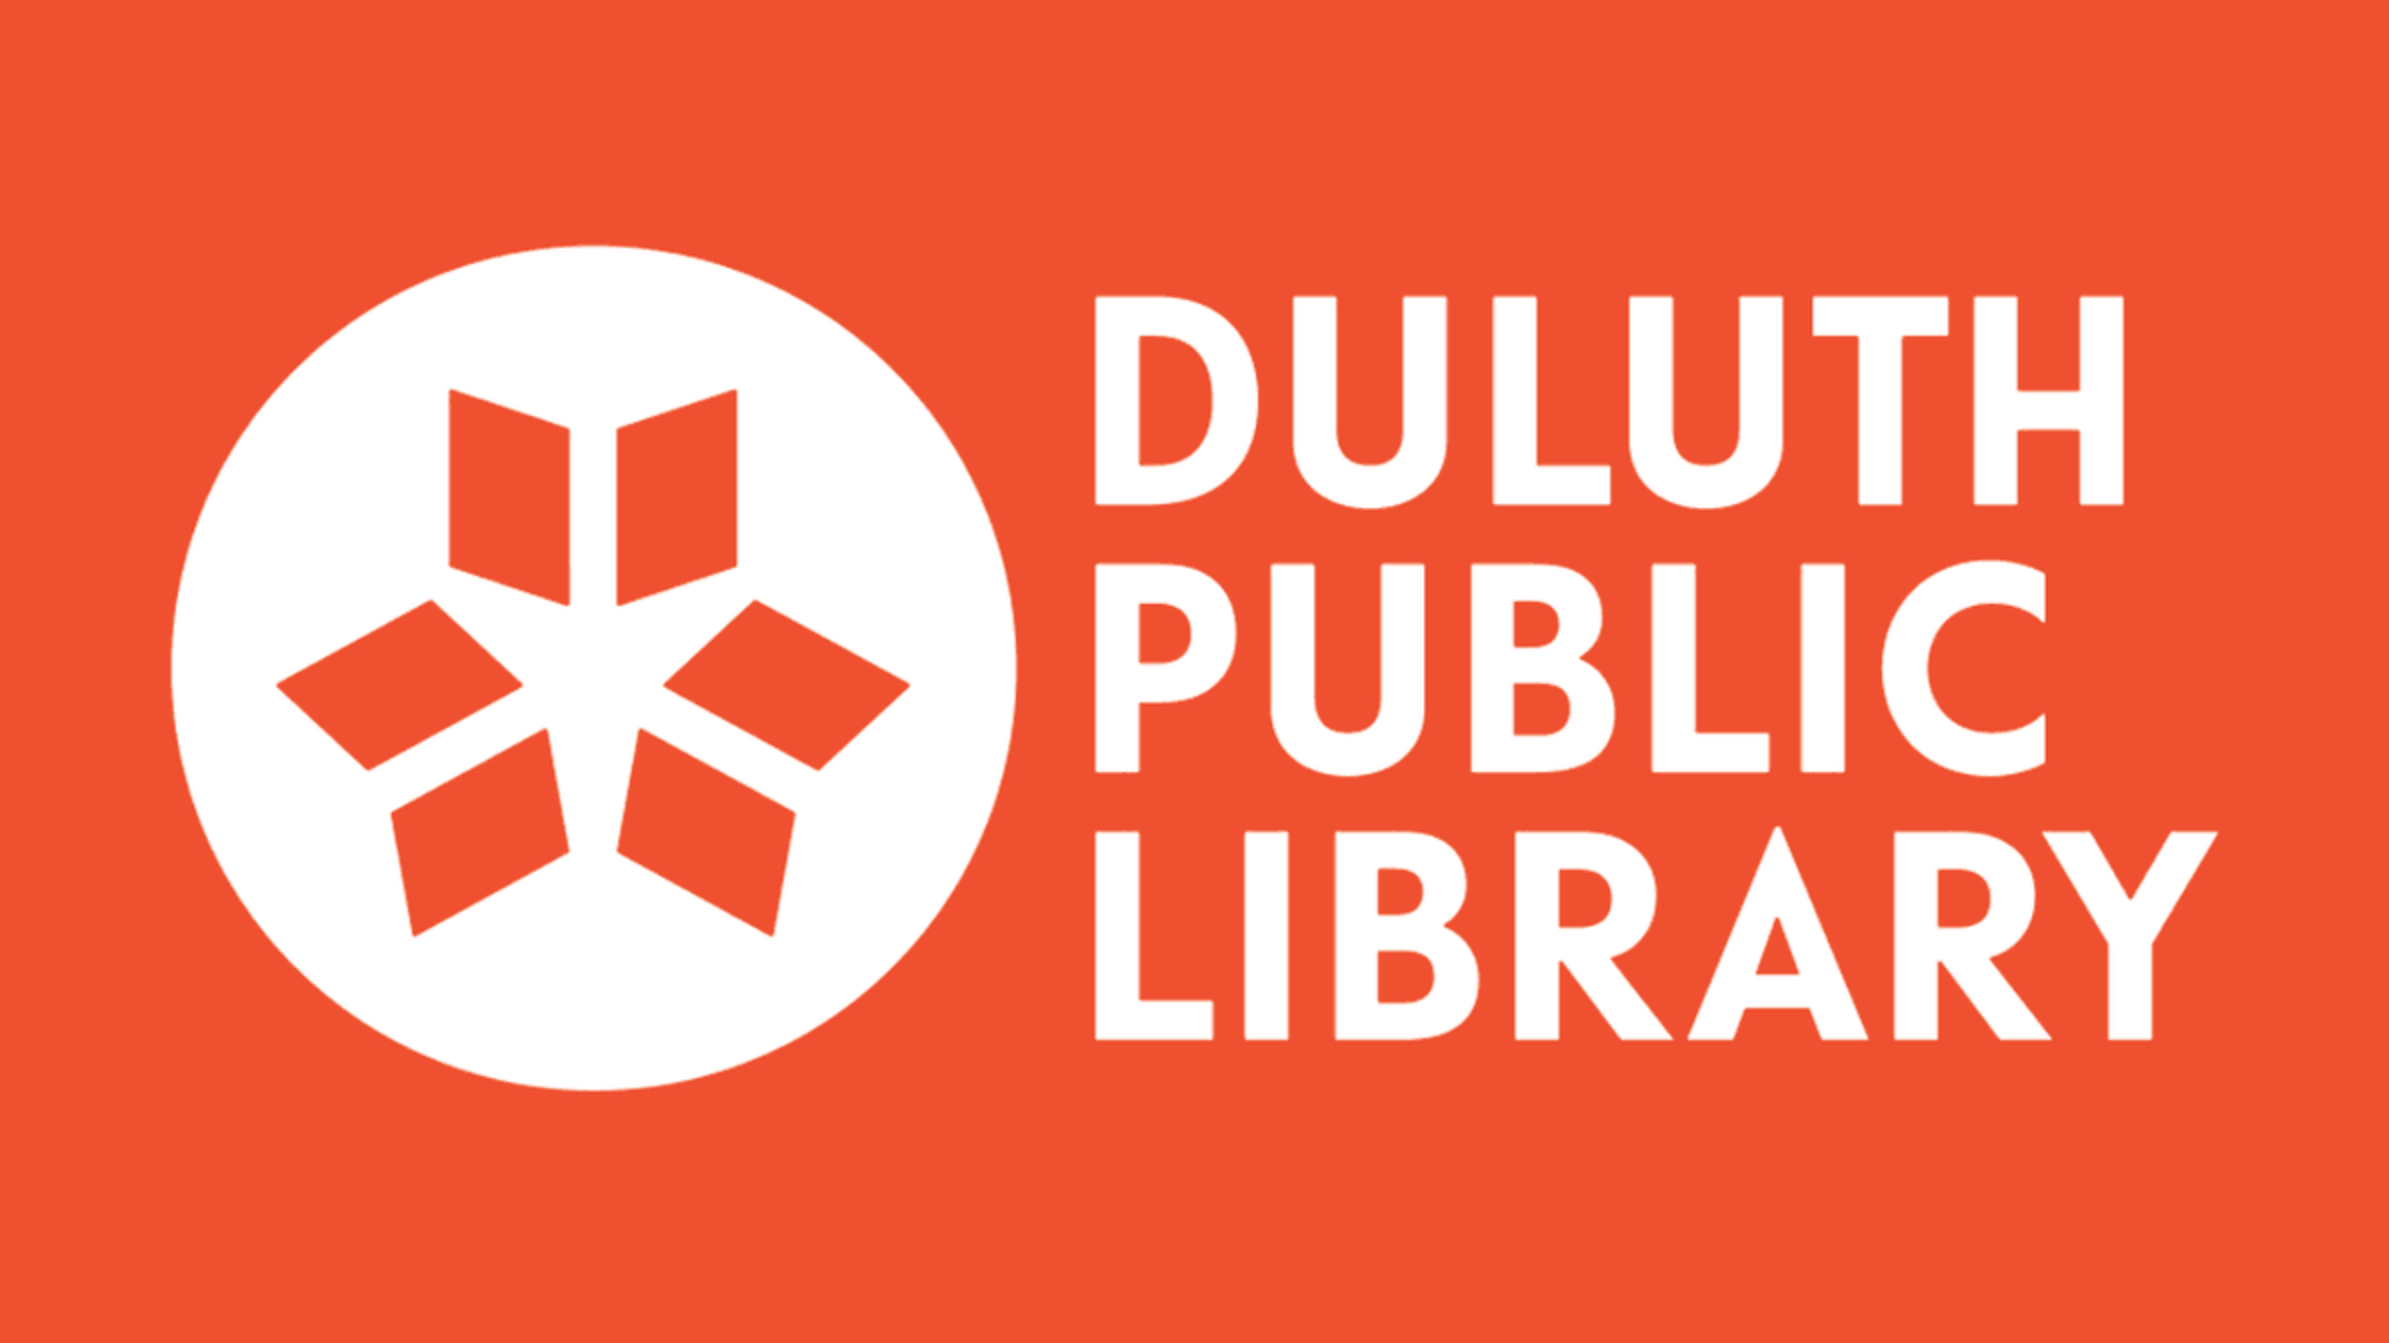 The logo for the Duluth Public Library.